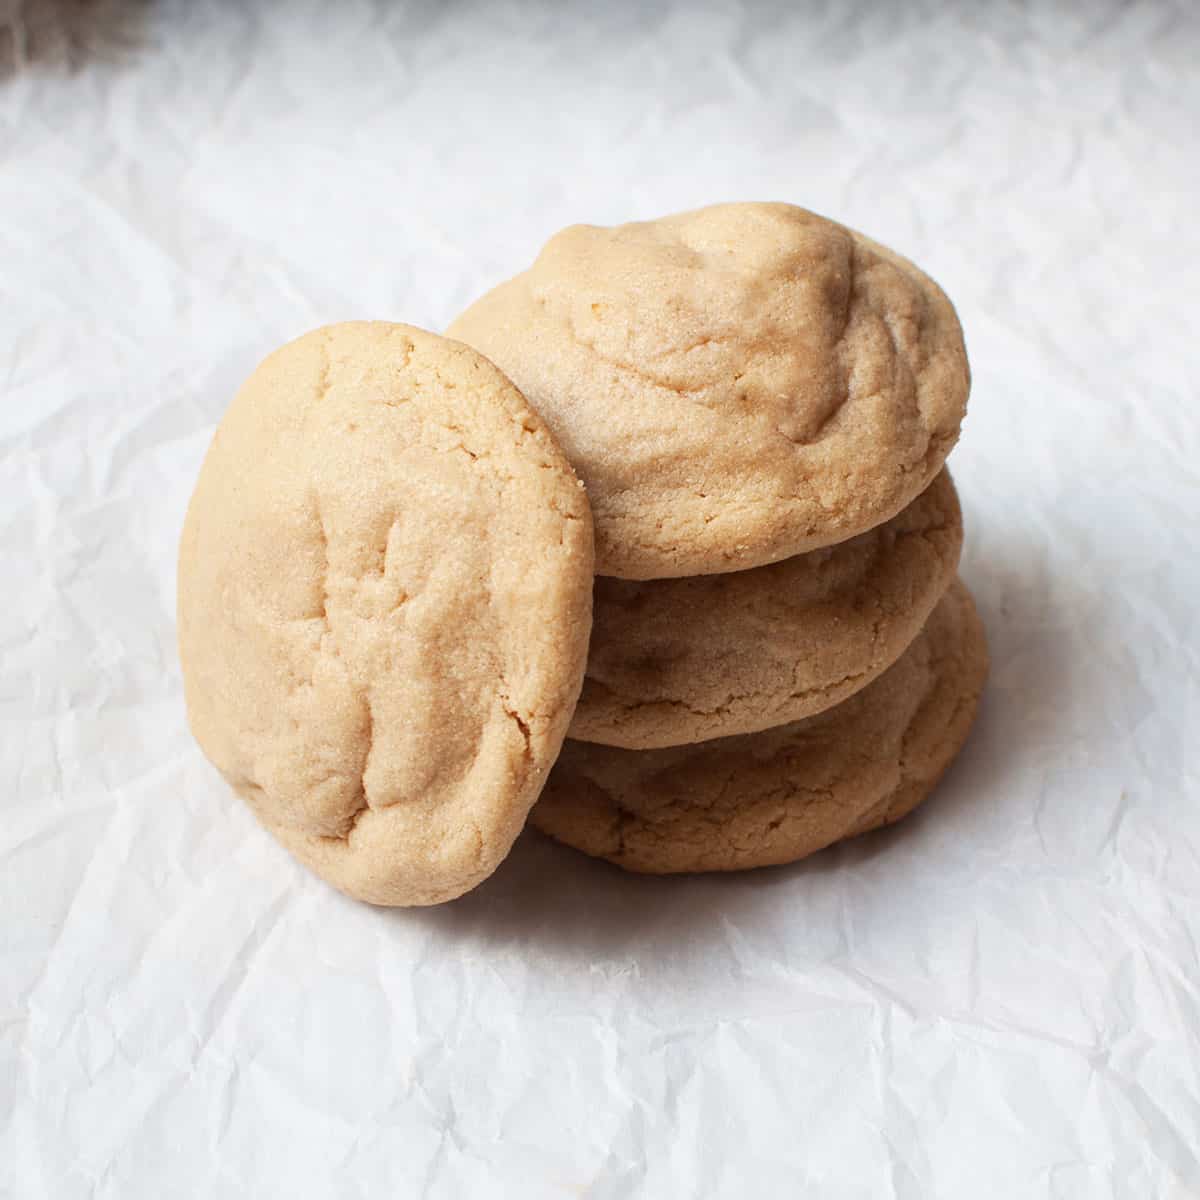 Amish Peanut Butter Cookies stacked up